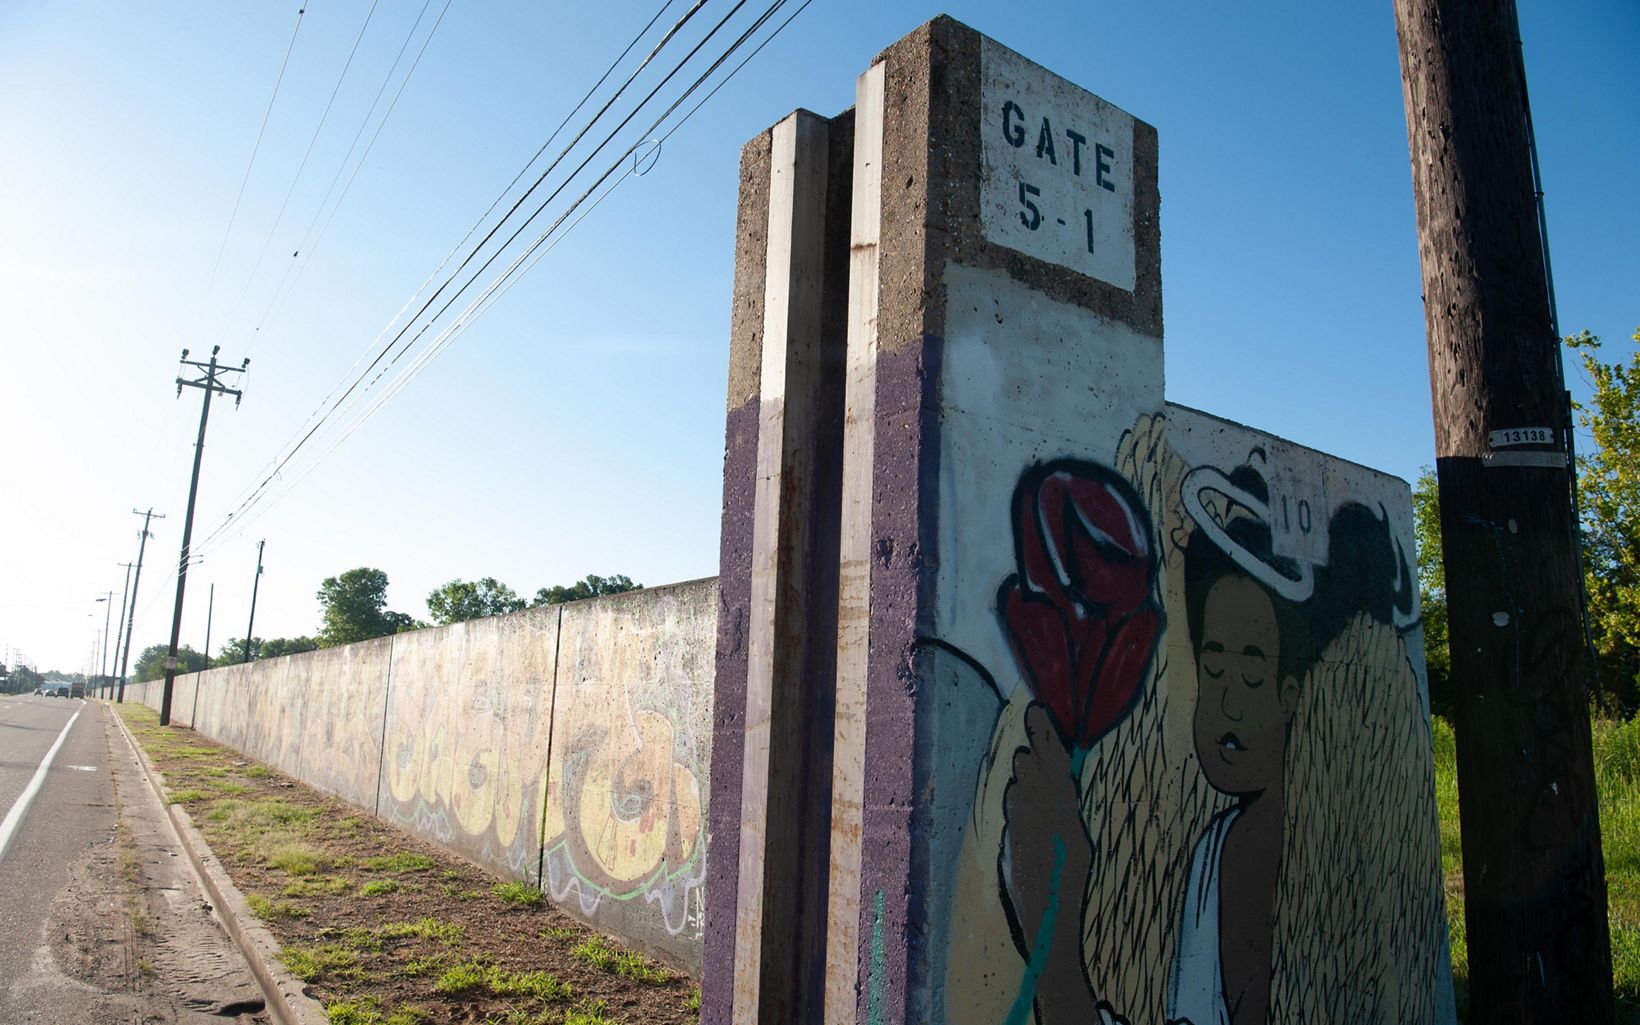 A long wall runs on the right side of a road and is decorated with paintings. At the end of the wall, the painting reads "Gate 5-1" and a depicts an angel with a halo holding a rose. 